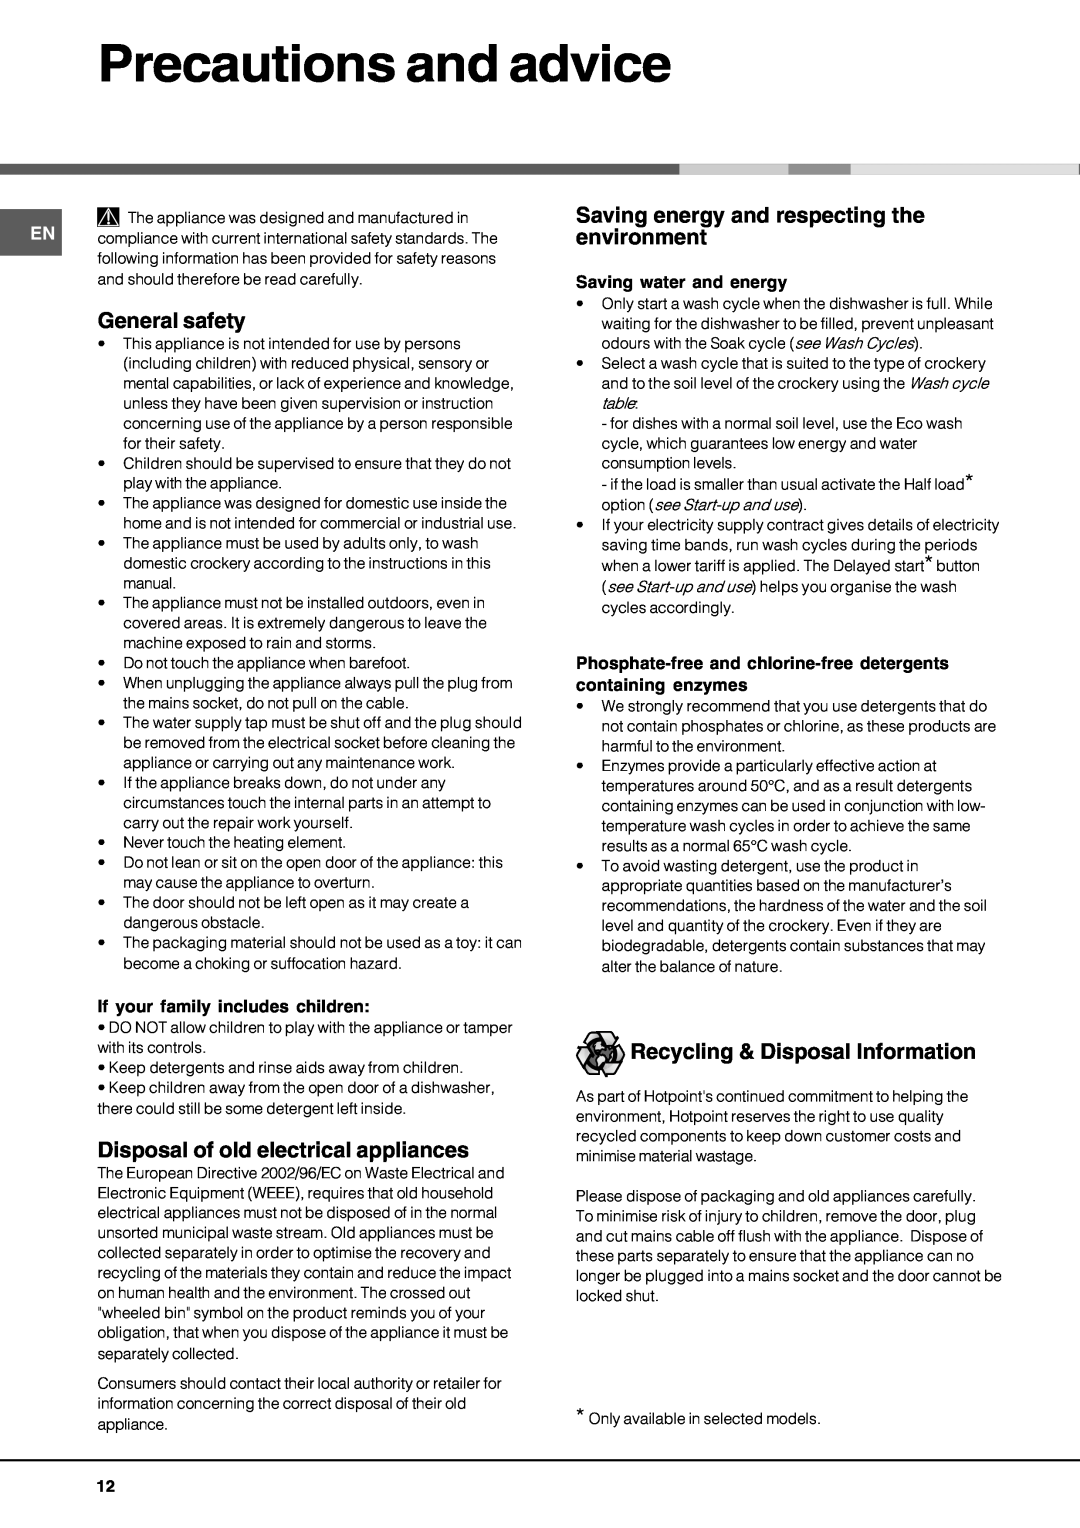 Hotpoint lft 04 manual Precautions and advice, General safety, Saving energy and respecting the environment 